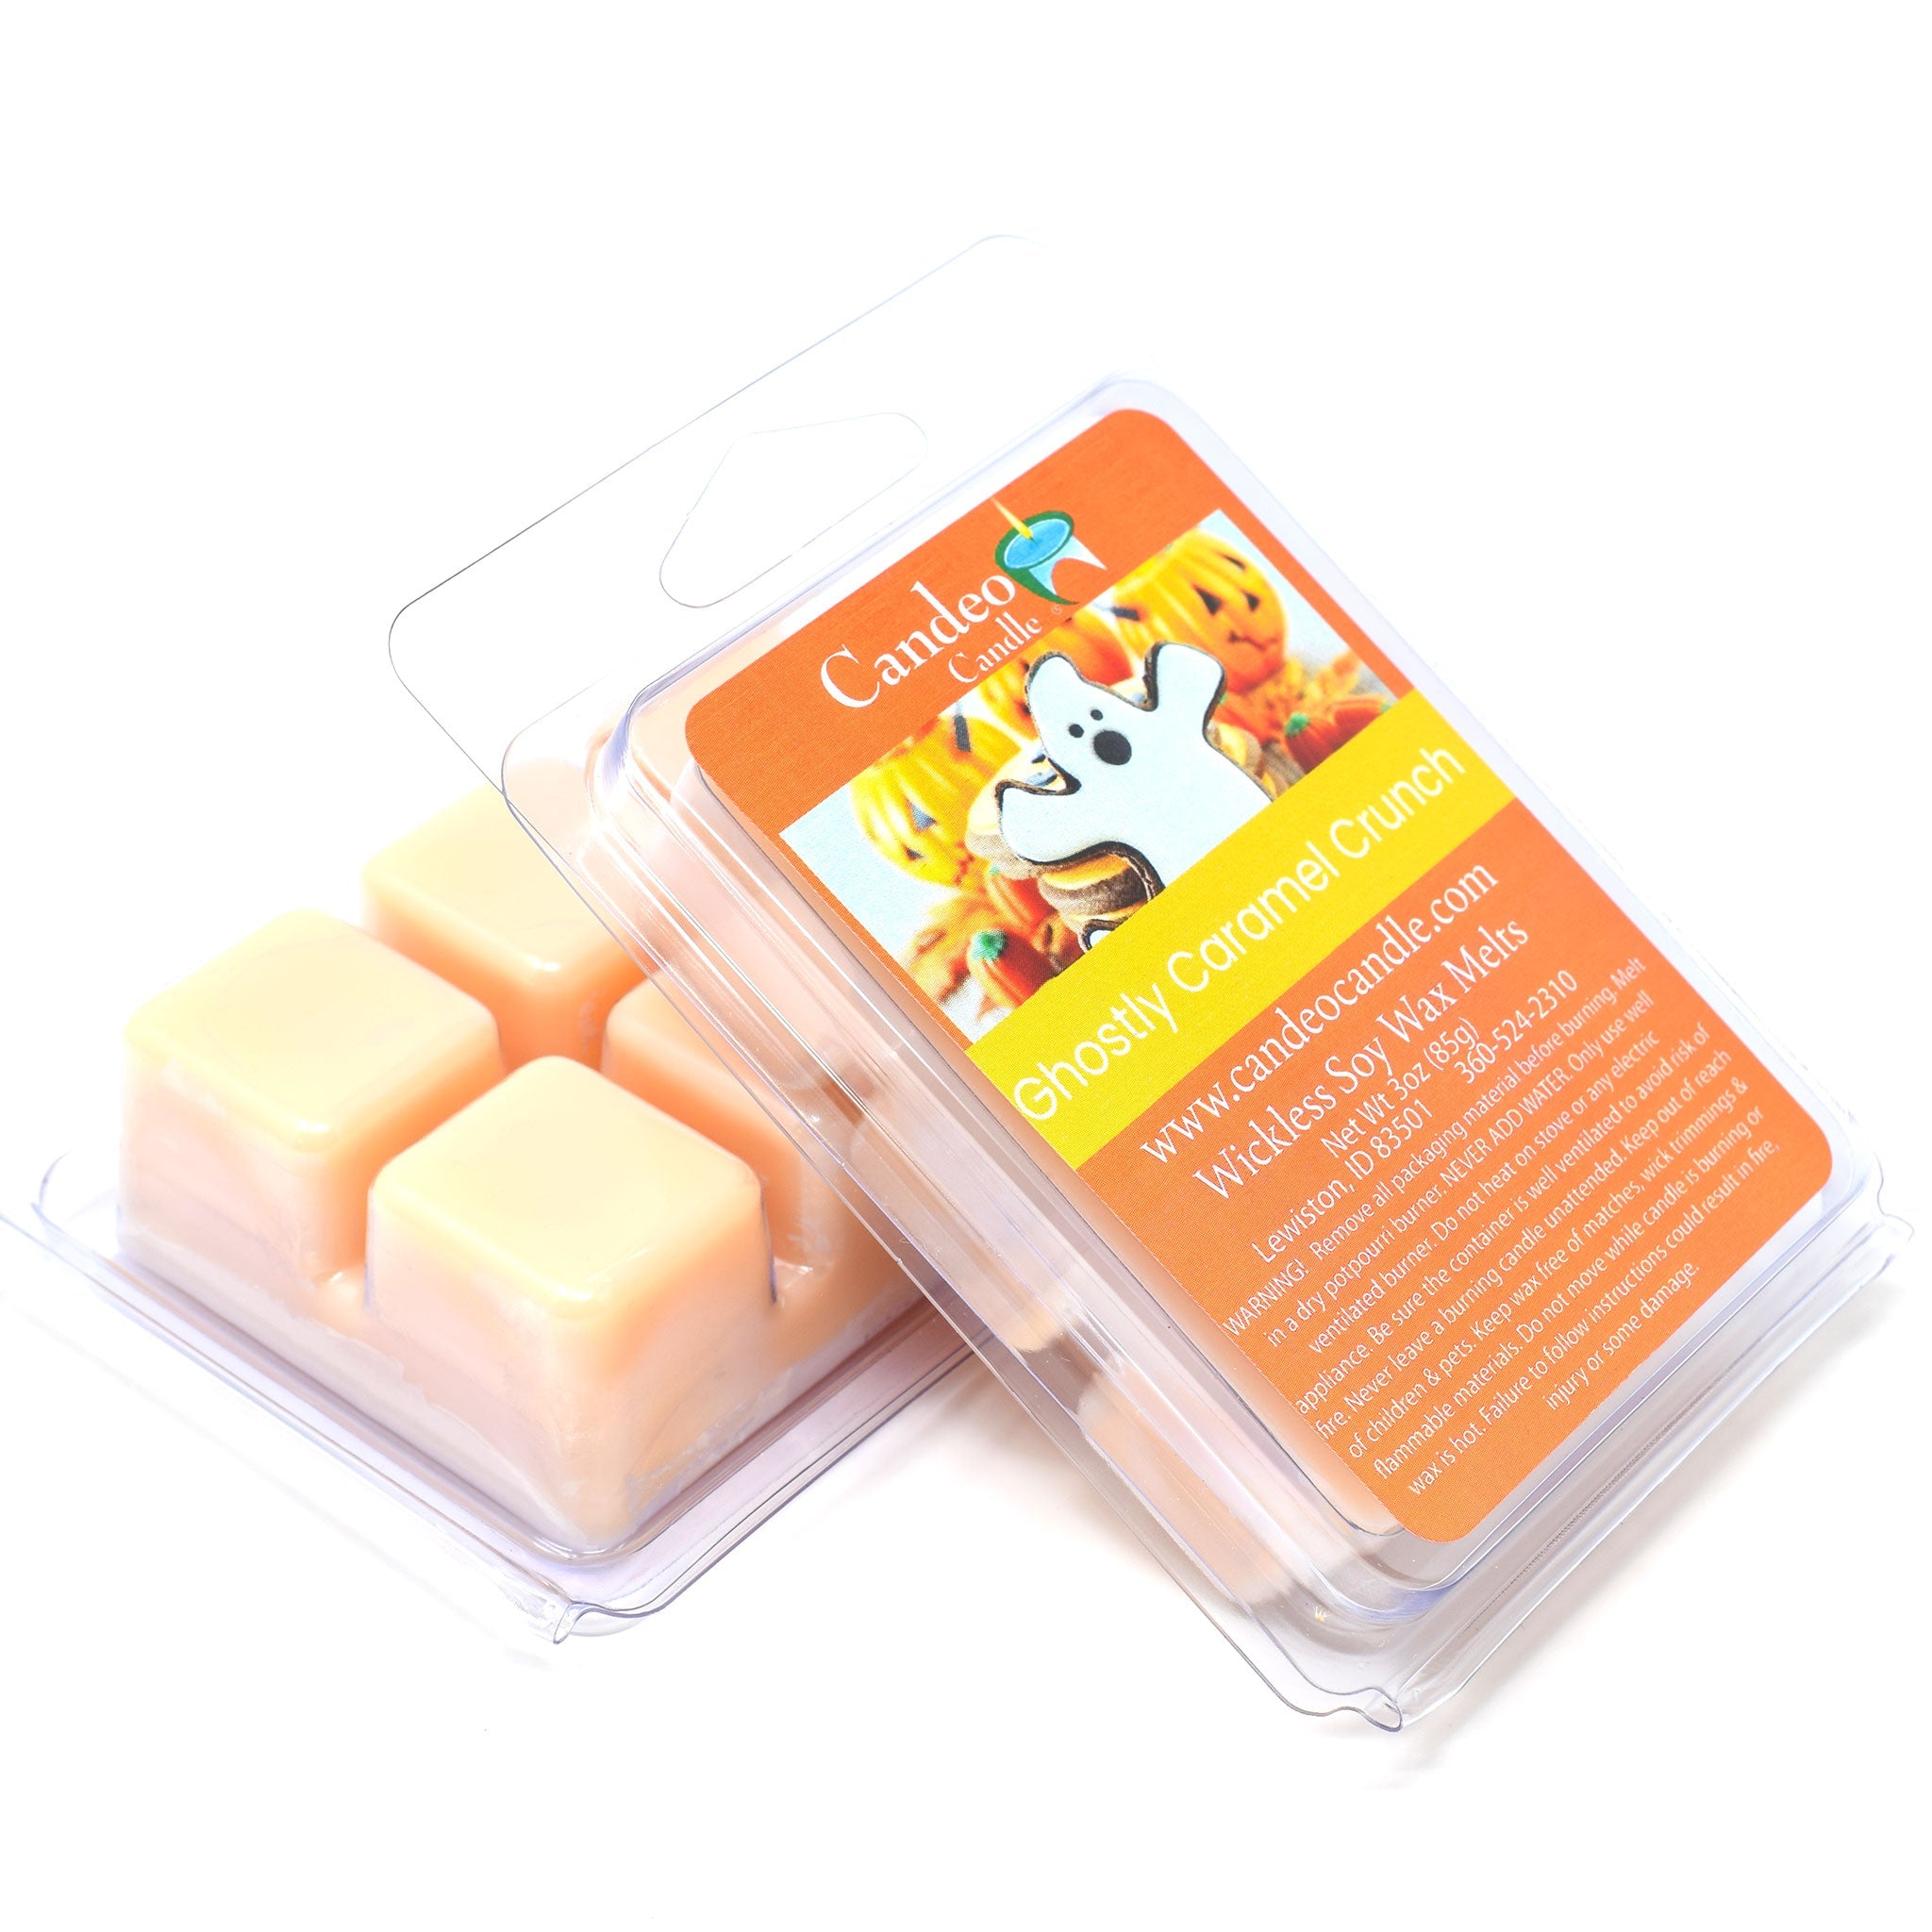 Ghostly Caramel Crunch, Soy Melt Cubes, 2-Pack - Candeo Candle